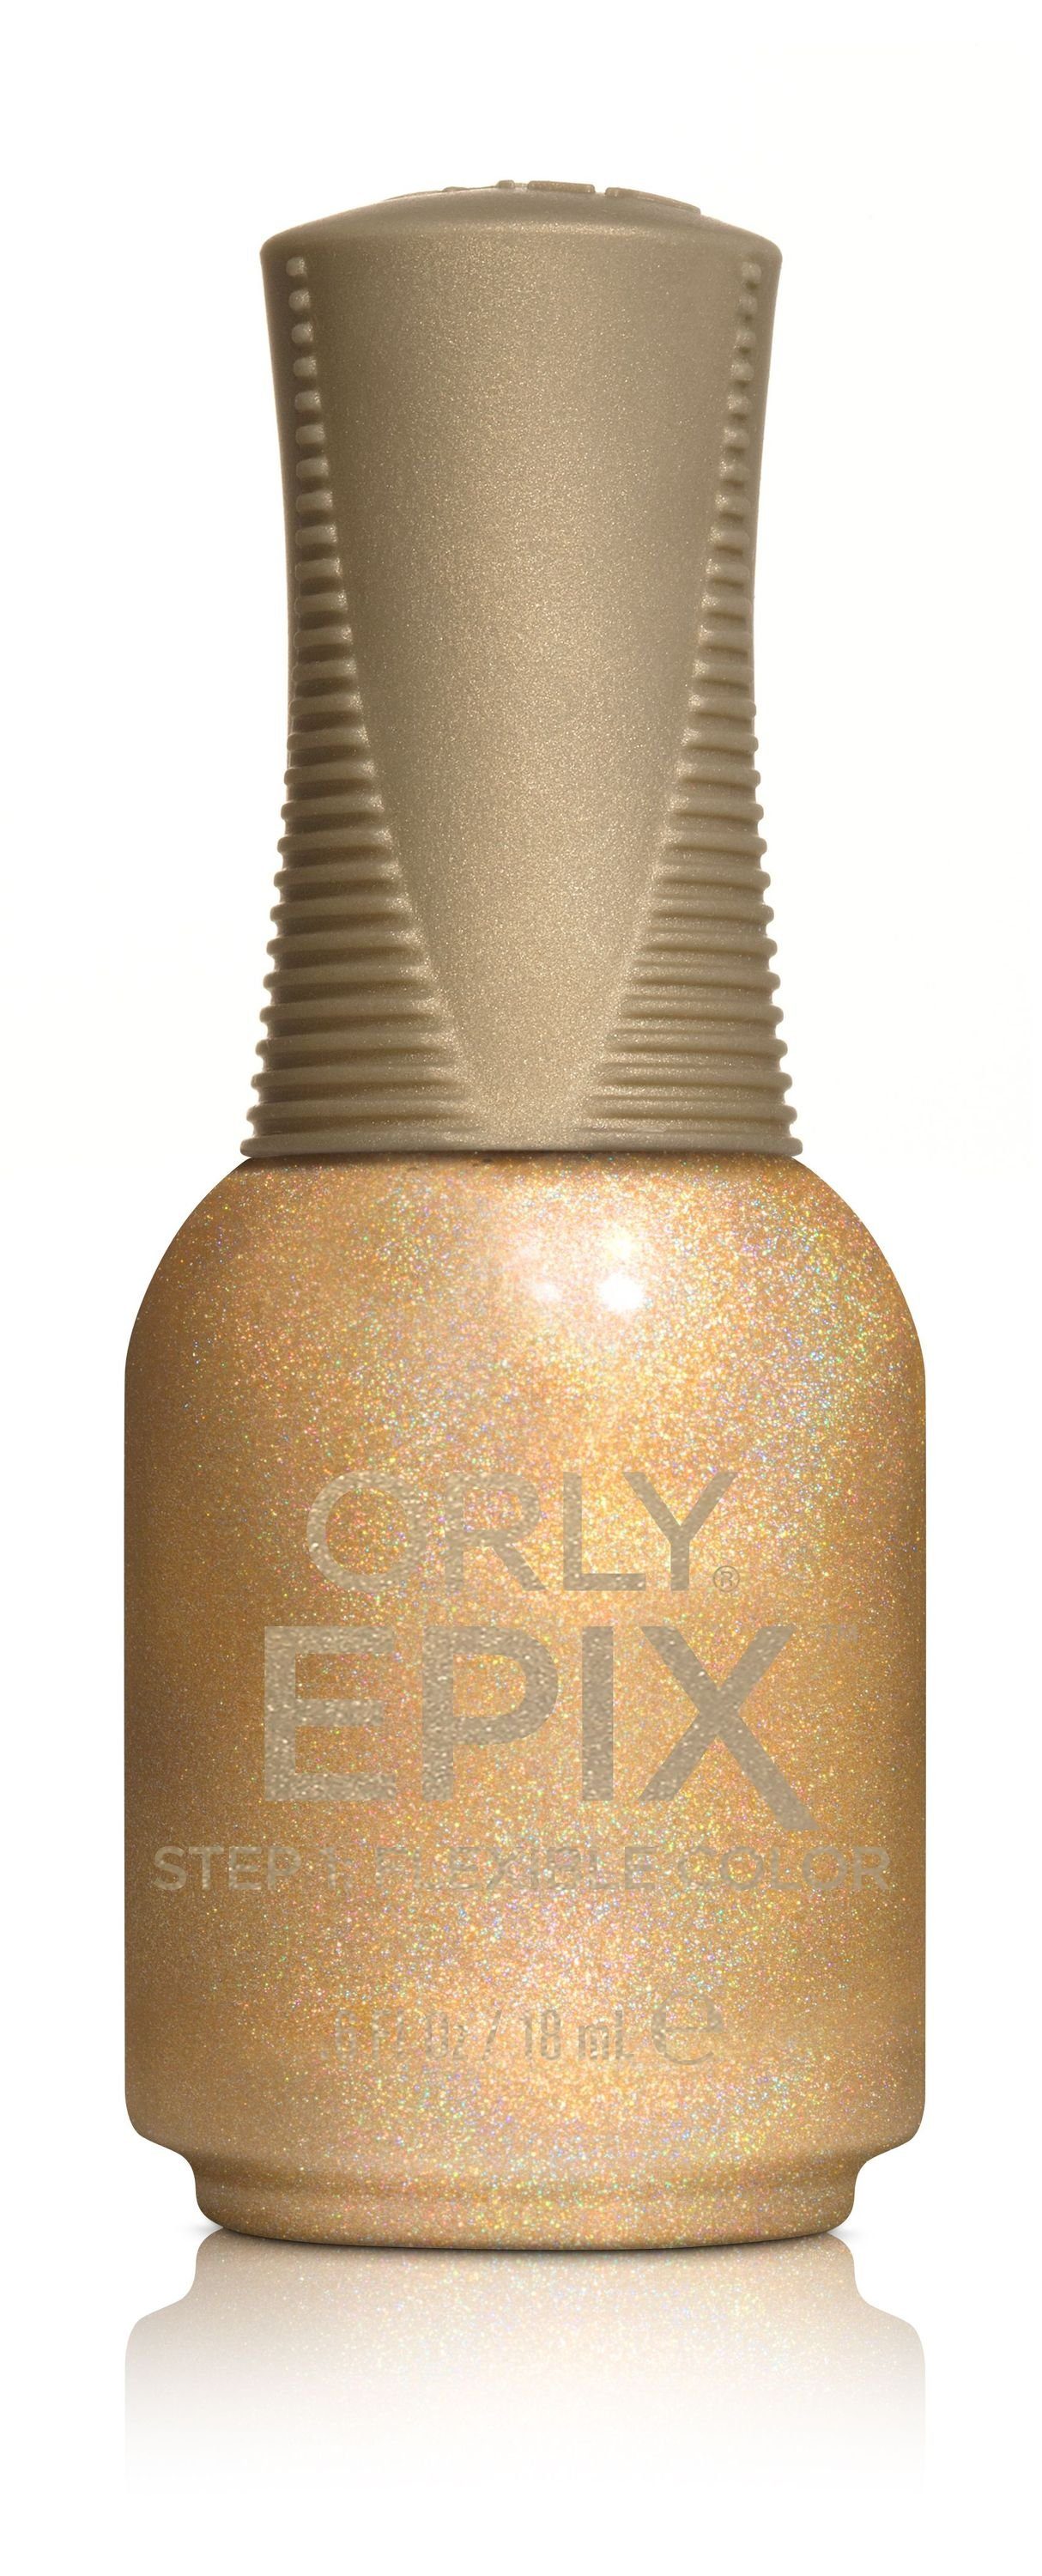 ORLY Special EPIX 18 Color - Effects, Flexible ORLY Nagellack ML -